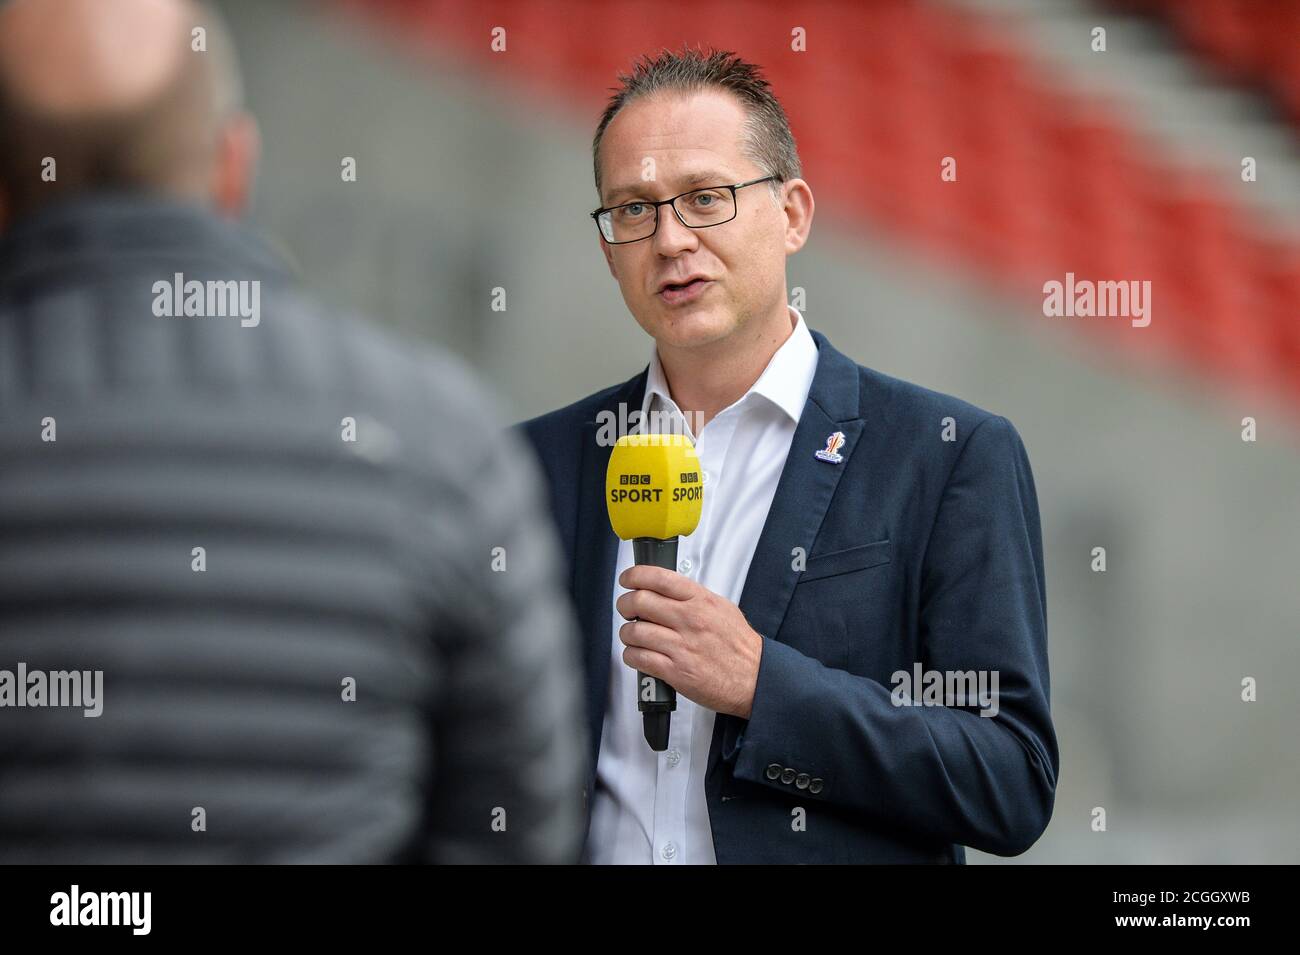 Jon Dutton CEO of the Rugby League World Cup 2021 talks to Dave Woods of BBC Sport Stock Photo